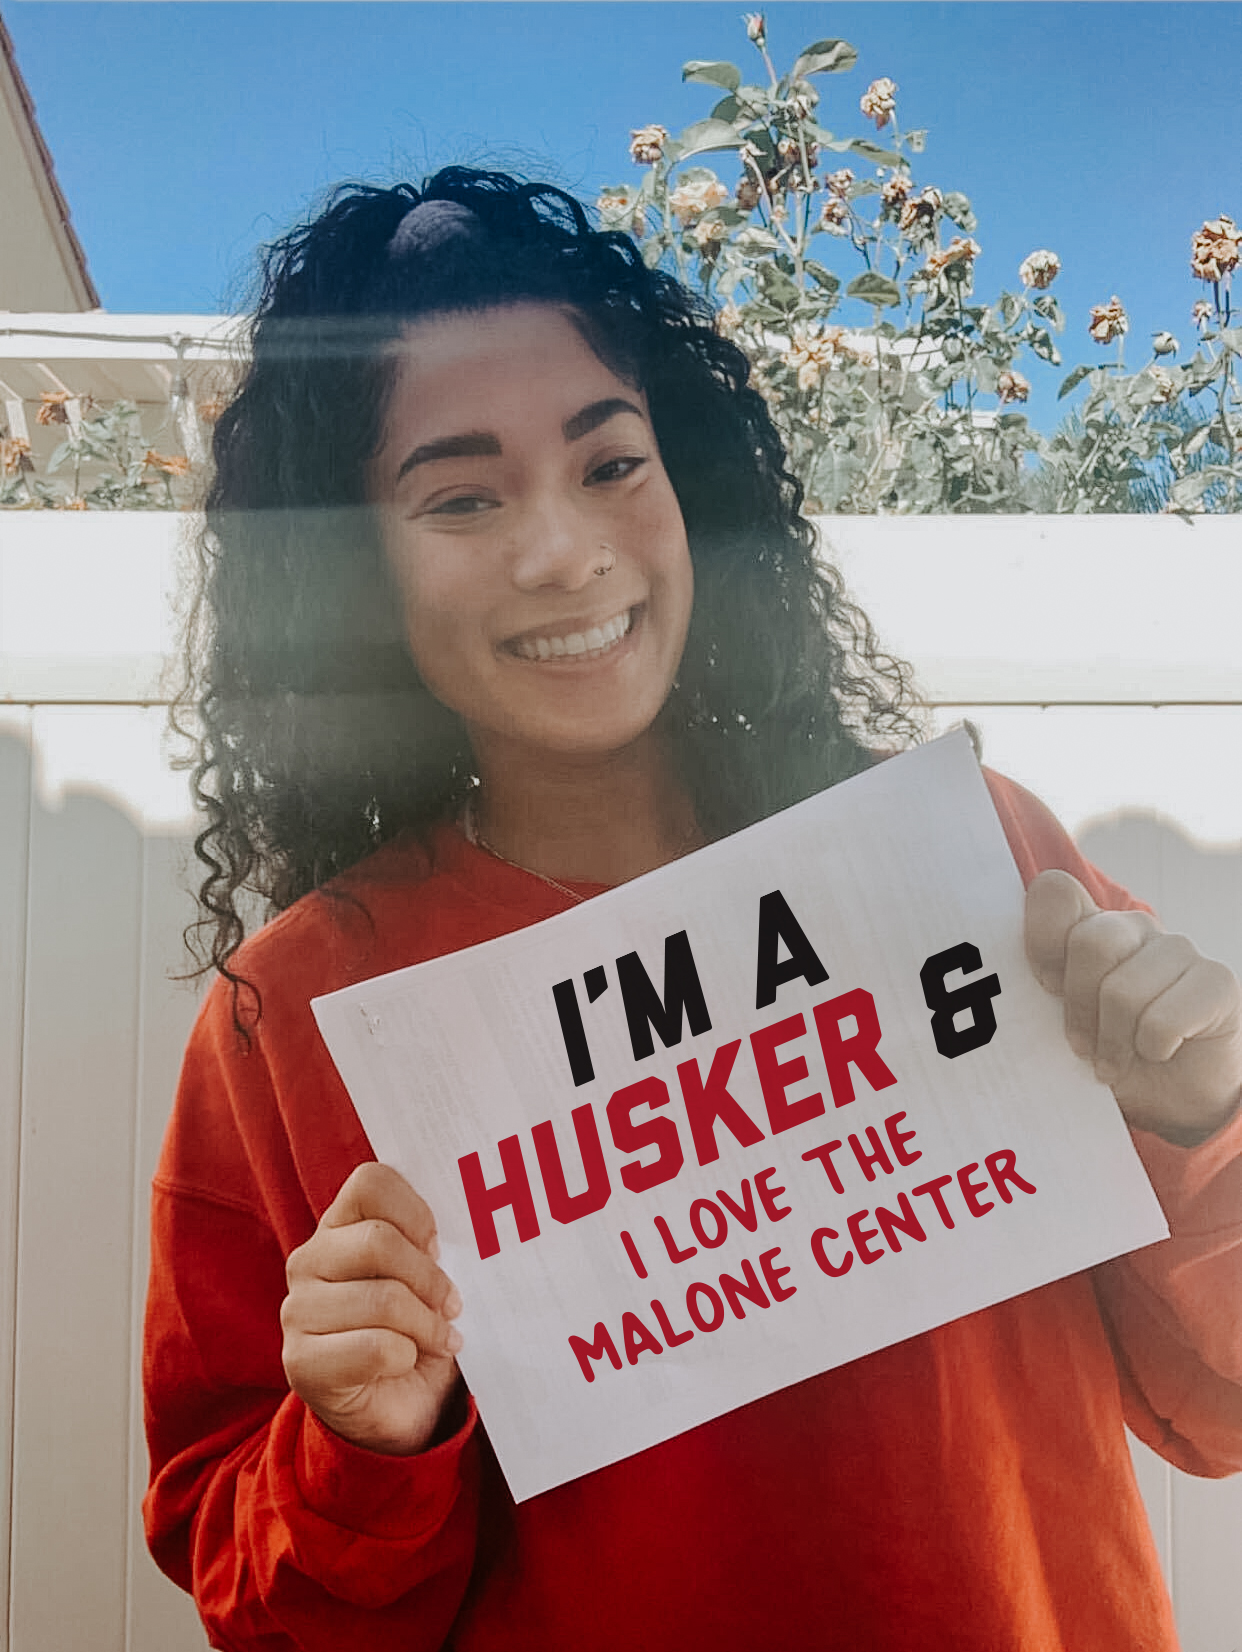 Kami holding a sign that says "I'm a Husker and I love the Malone Center."